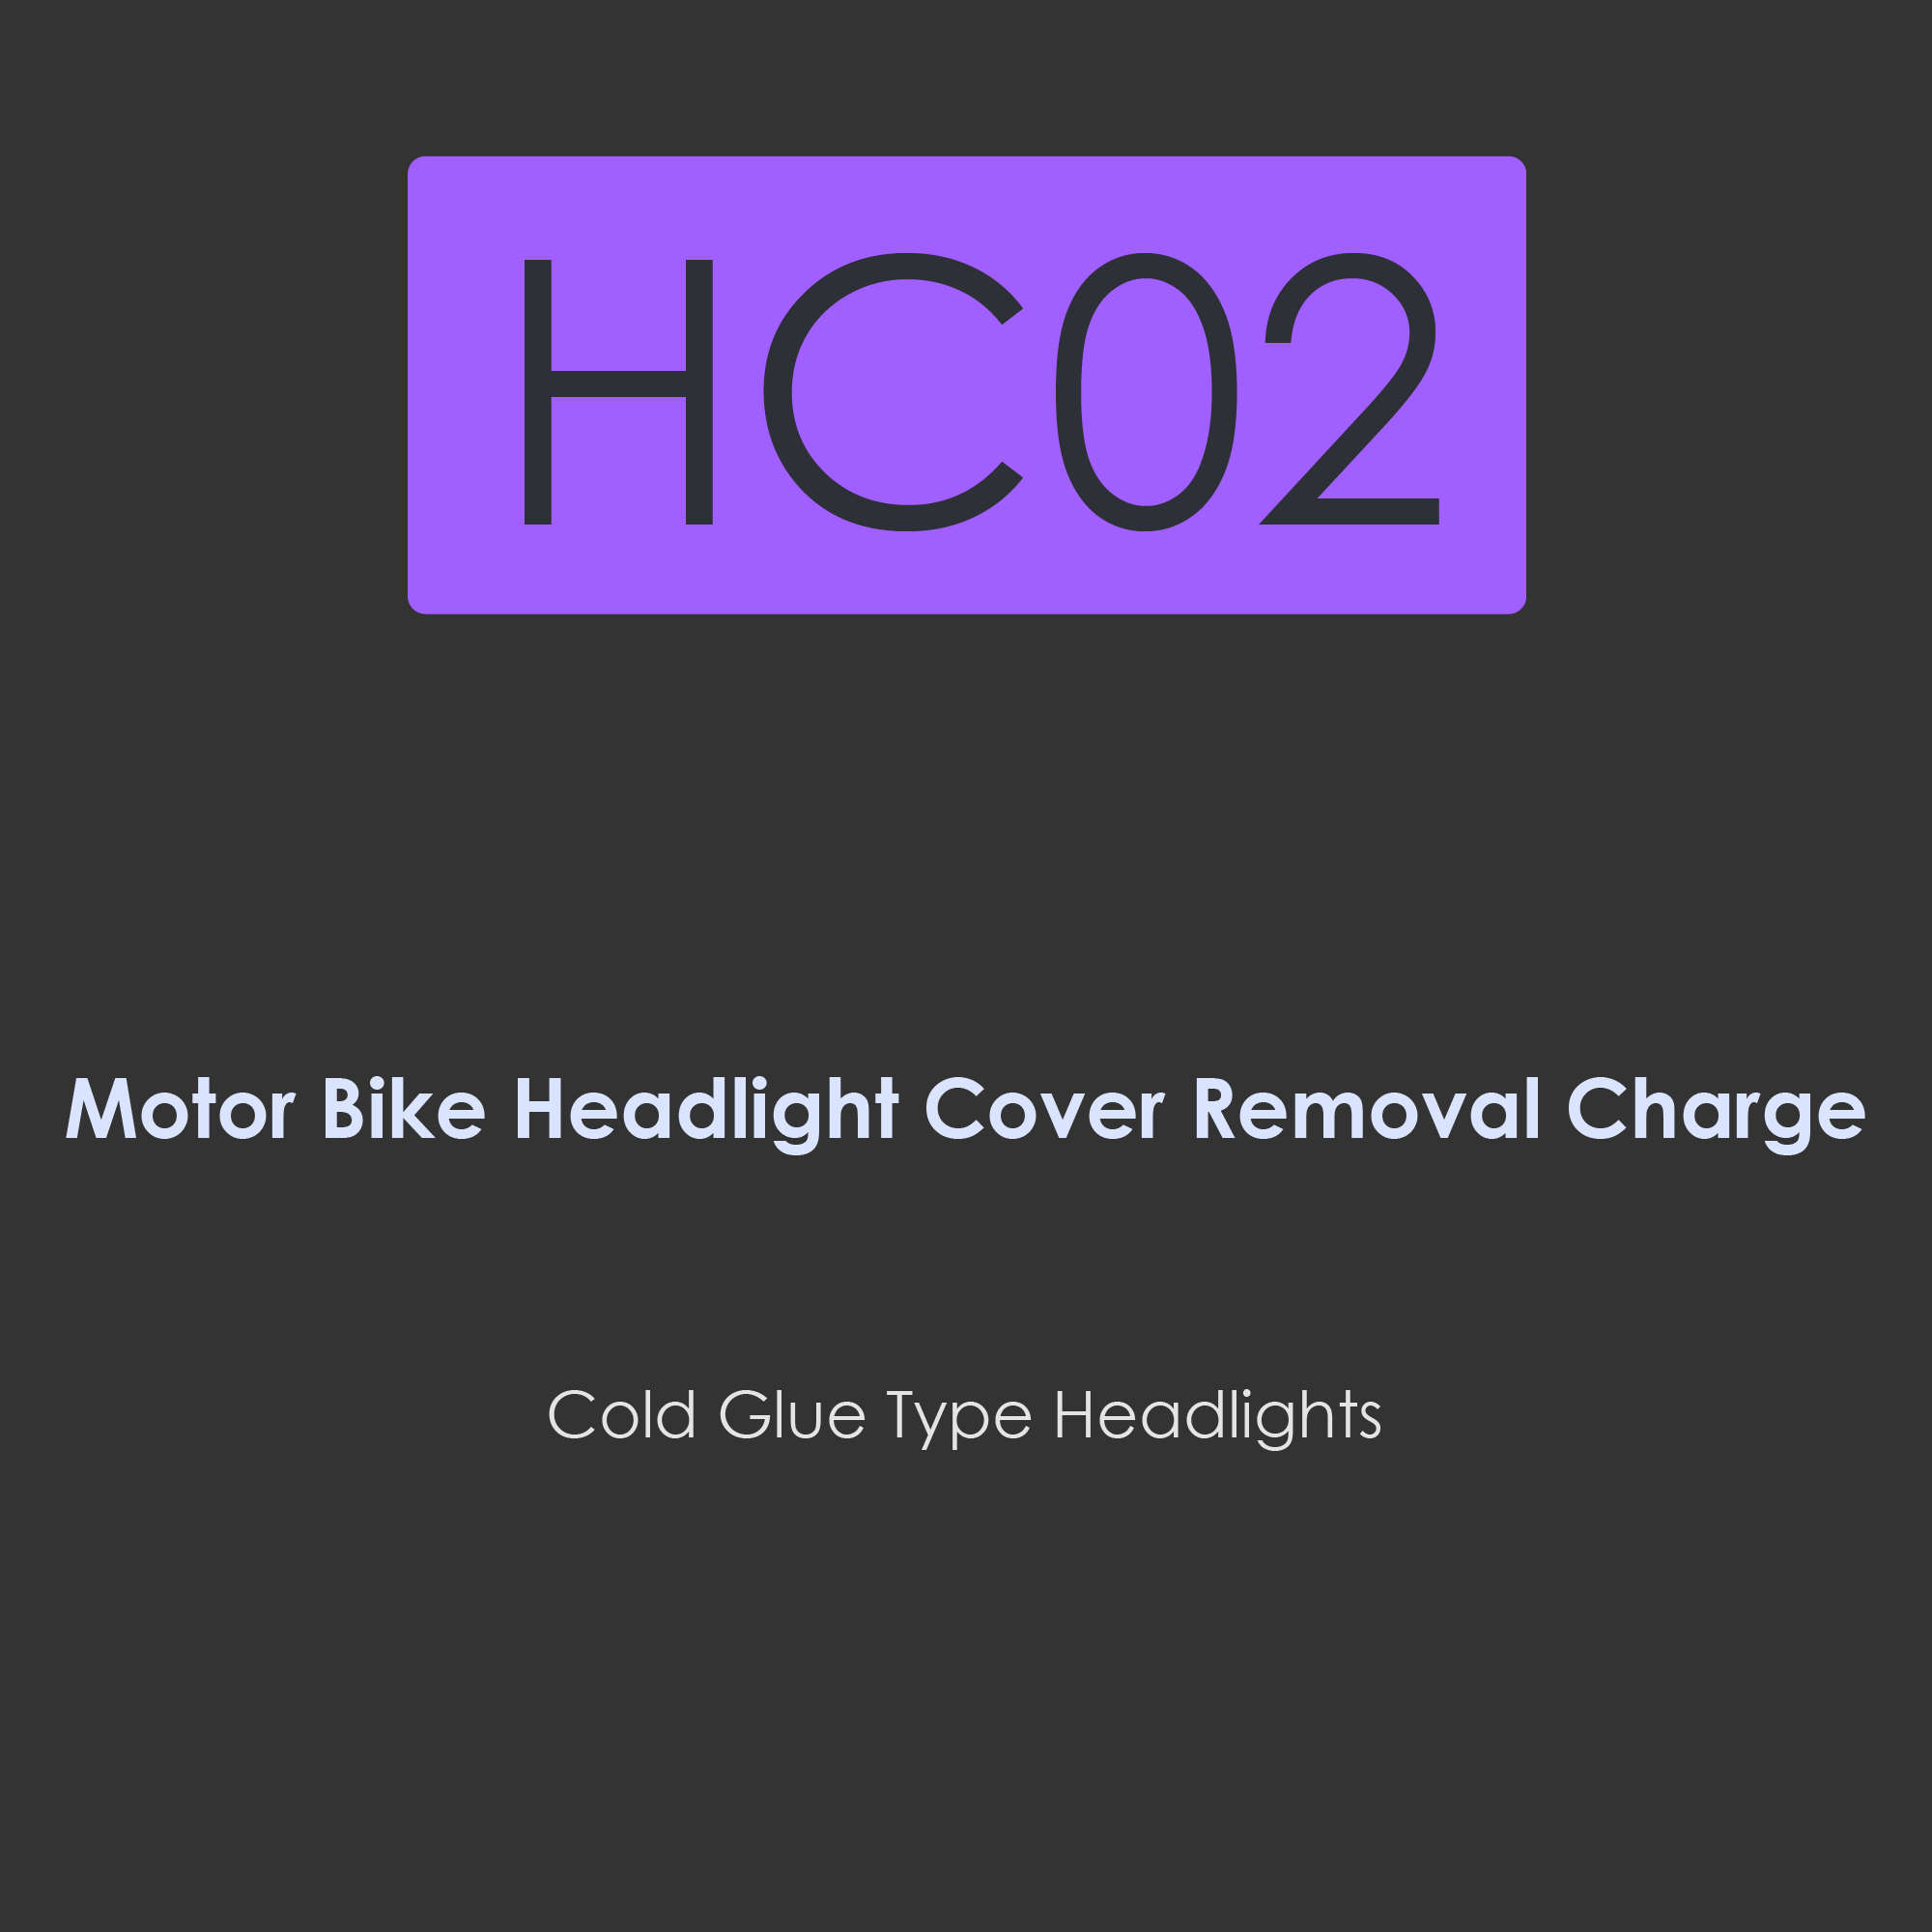 HC02-Motor bike headlight removal charge for cold glue type headlights